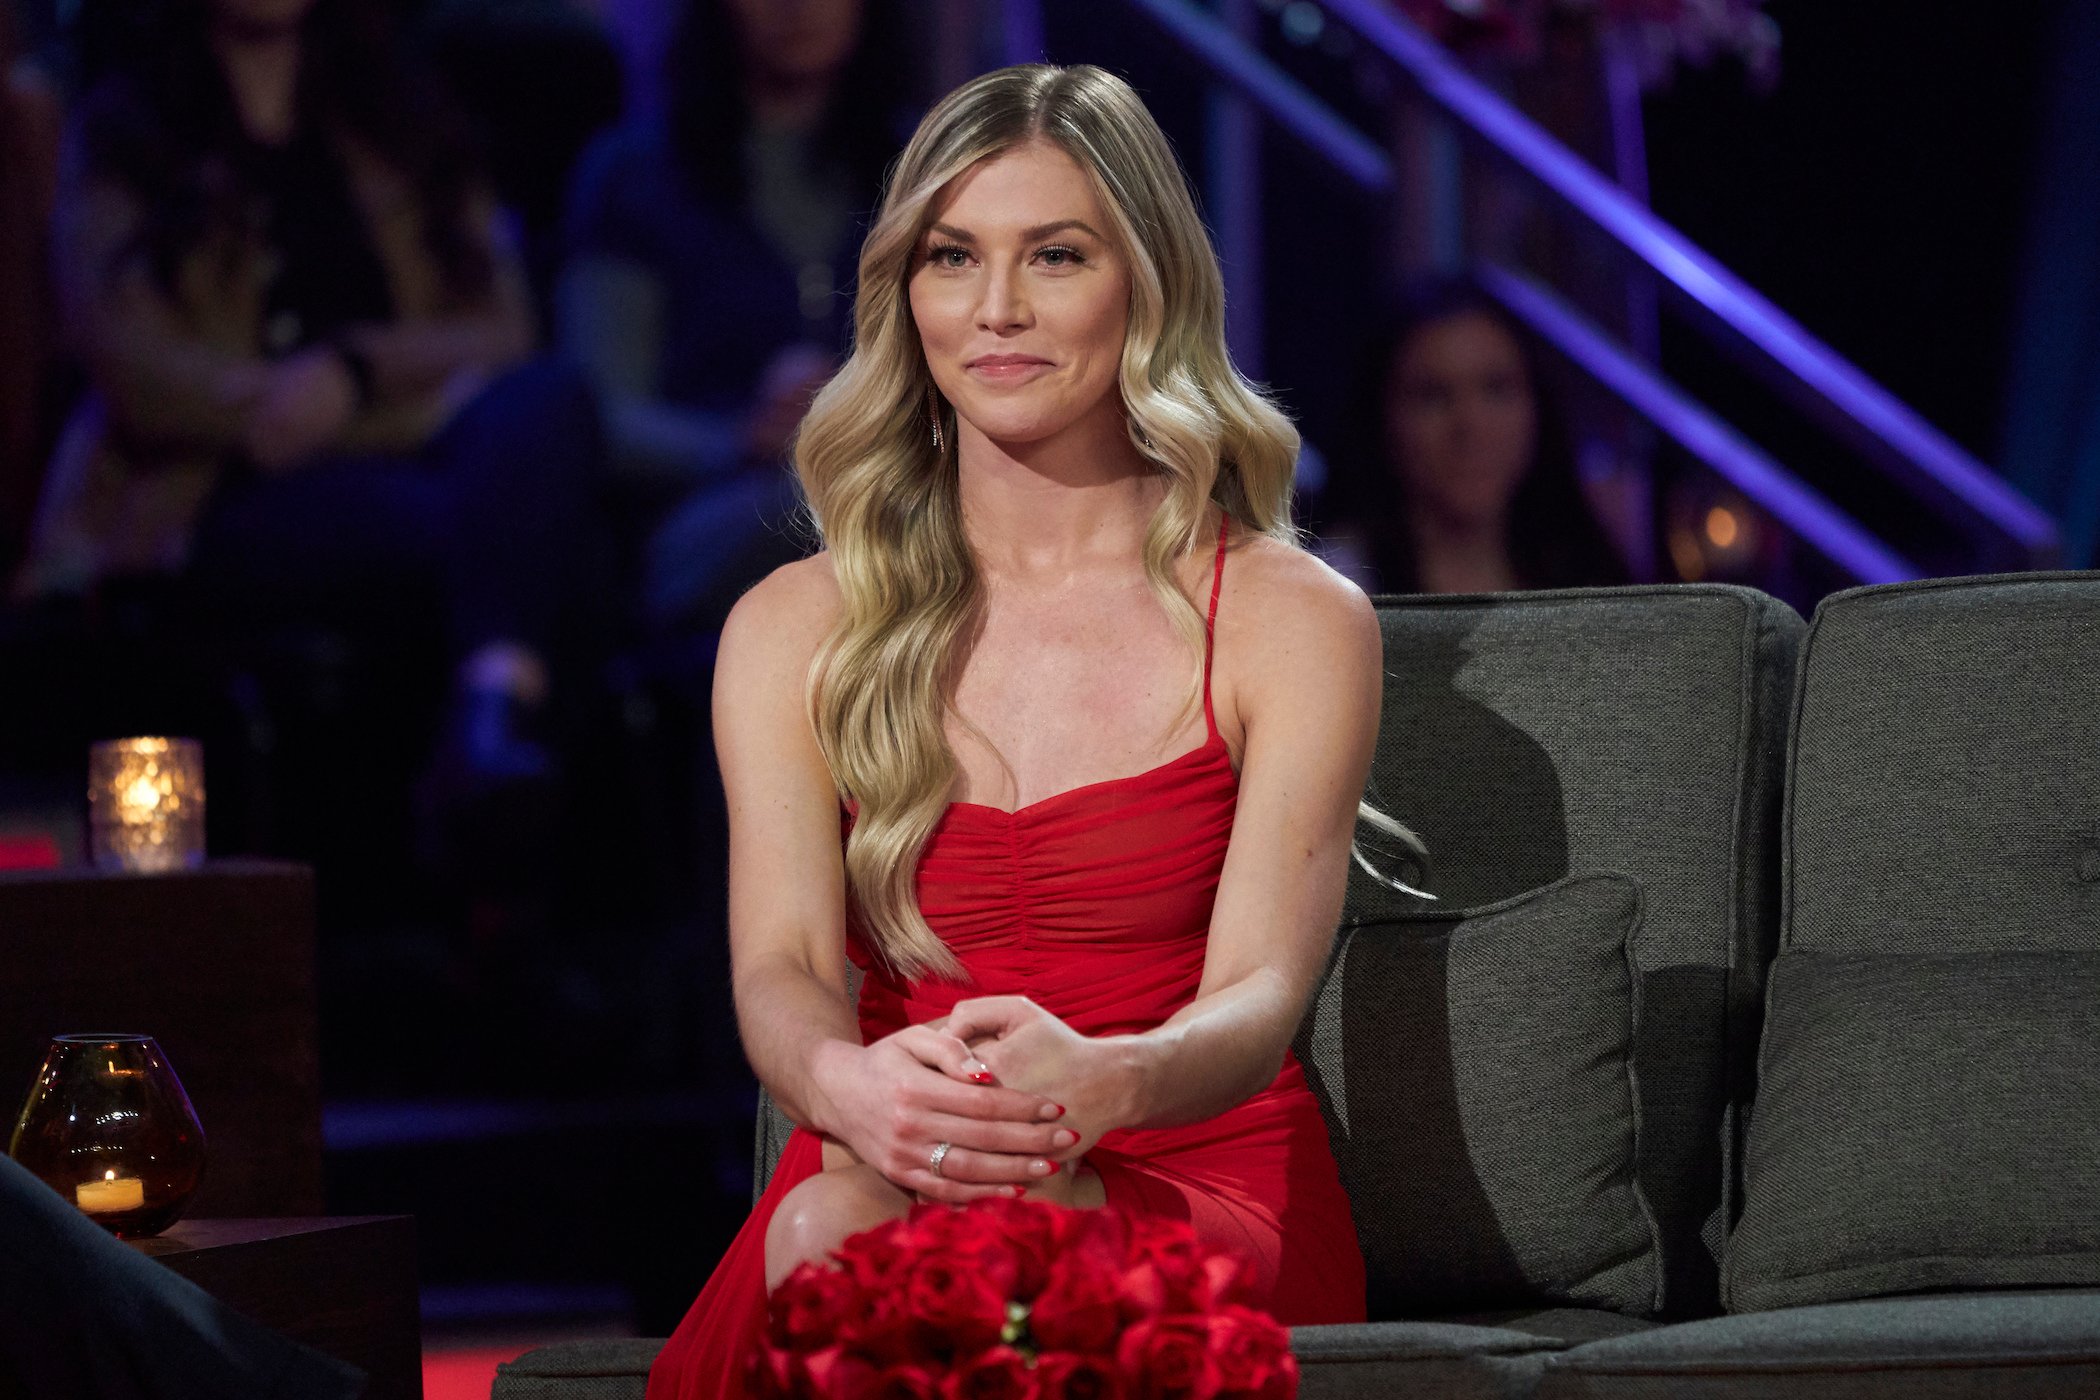 Shanae Ankney from 'The Bachelor' sitting in a red dress at the after show. She will join the 'Bachelor in Paradise' 2022 cast.